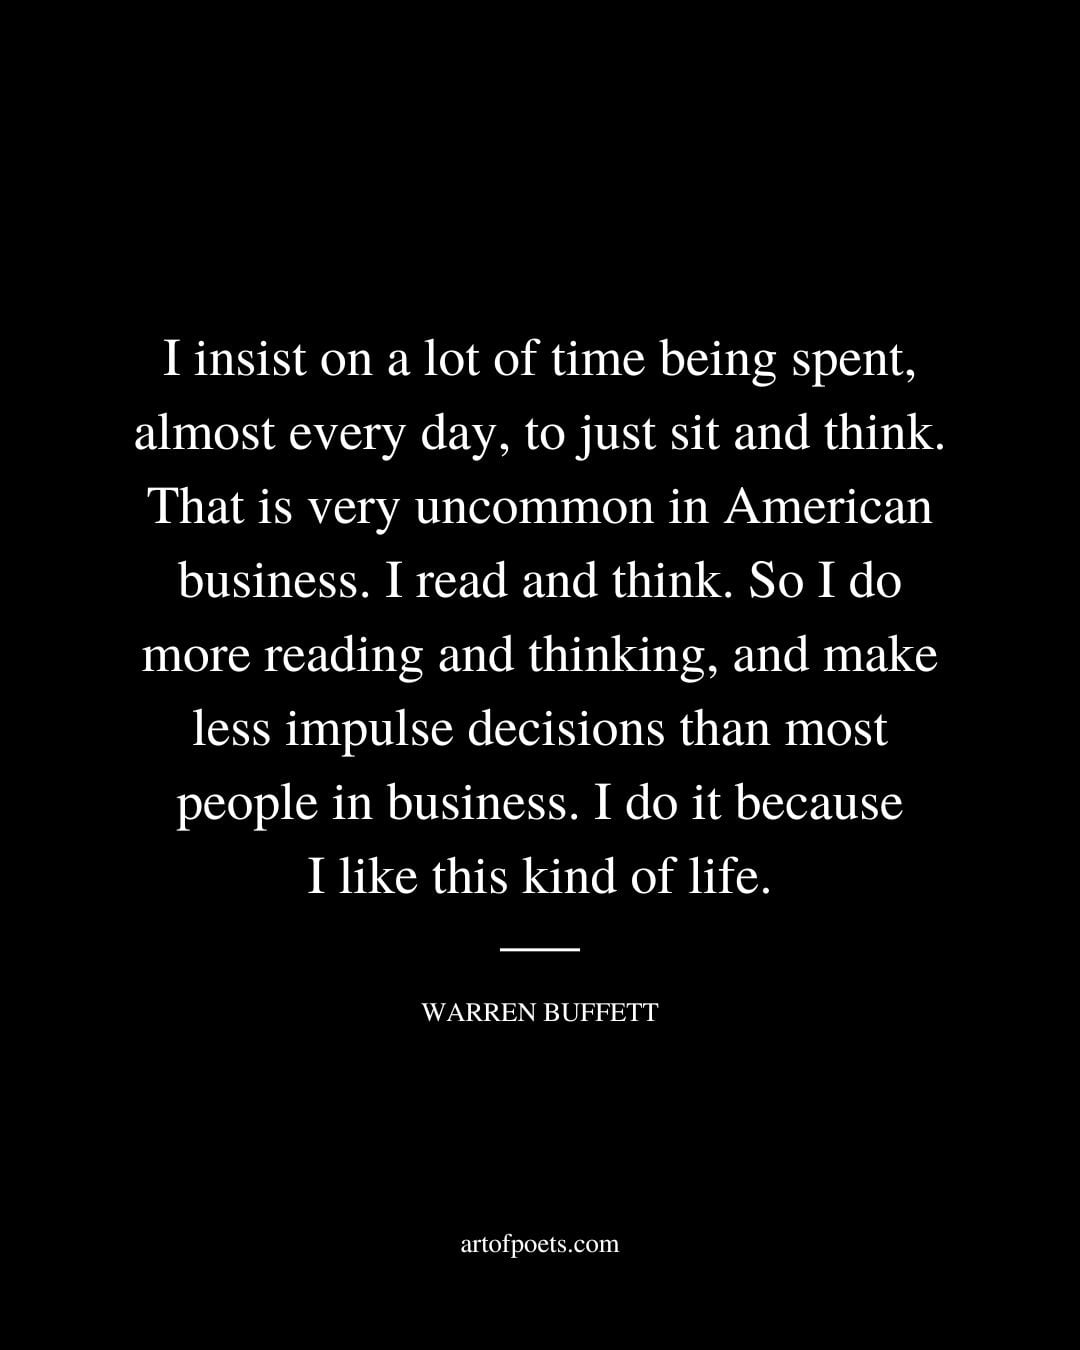 I insist on a lot of time being spent almost every day to just sit and think. That is very uncommon in American business. I read and think